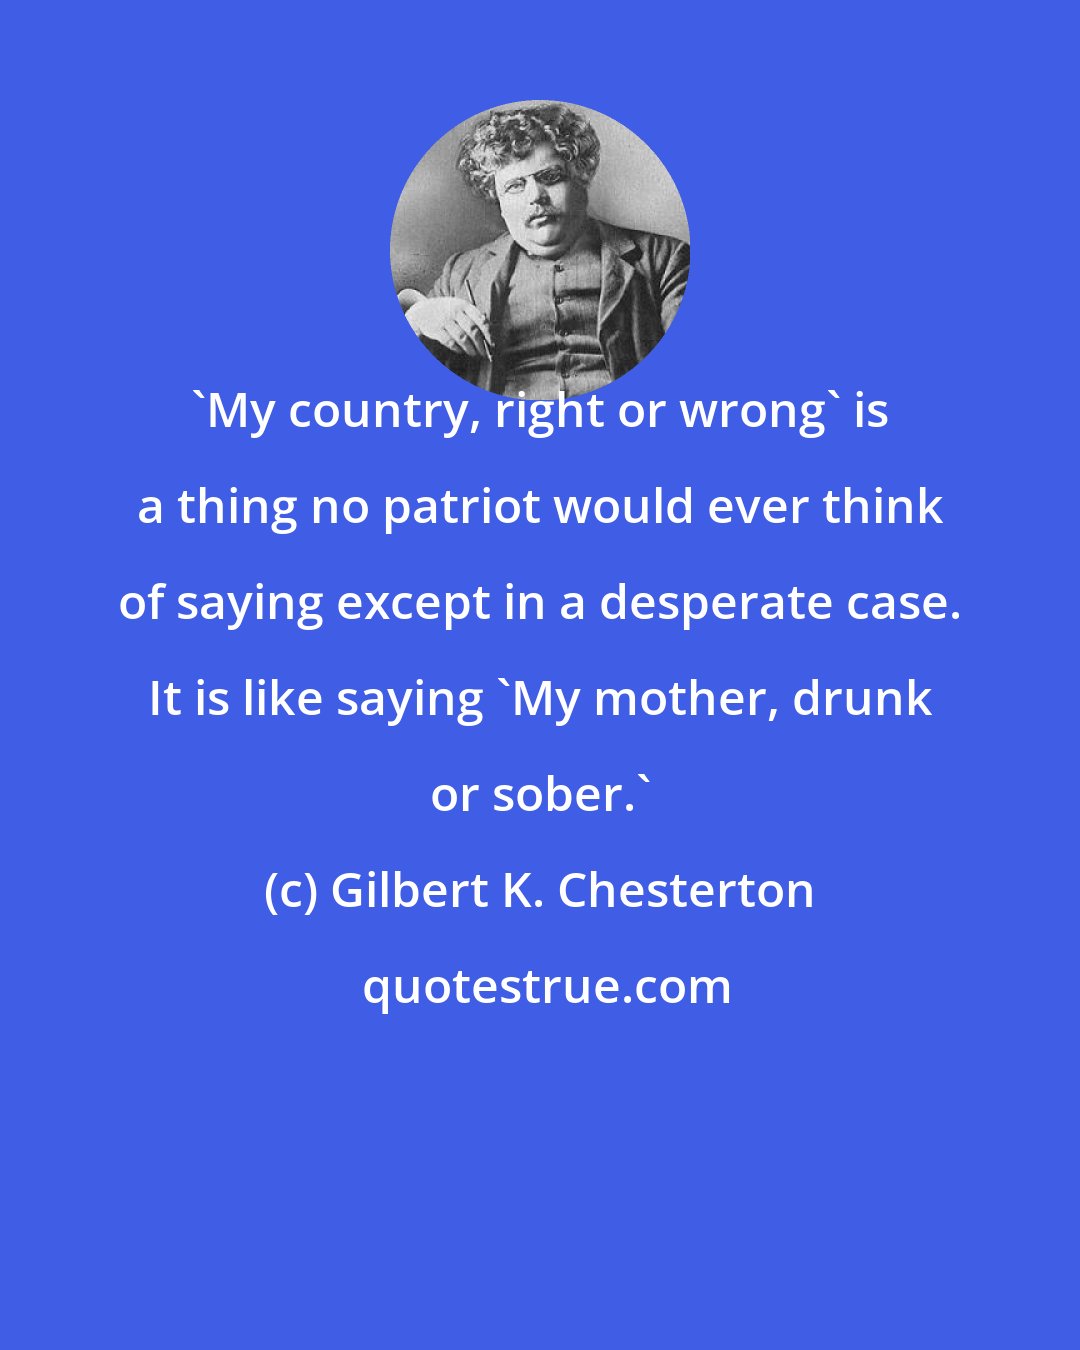 Gilbert K. Chesterton: 'My country, right or wrong' is a thing no patriot would ever think of saying except in a desperate case. It is like saying 'My mother, drunk or sober.'